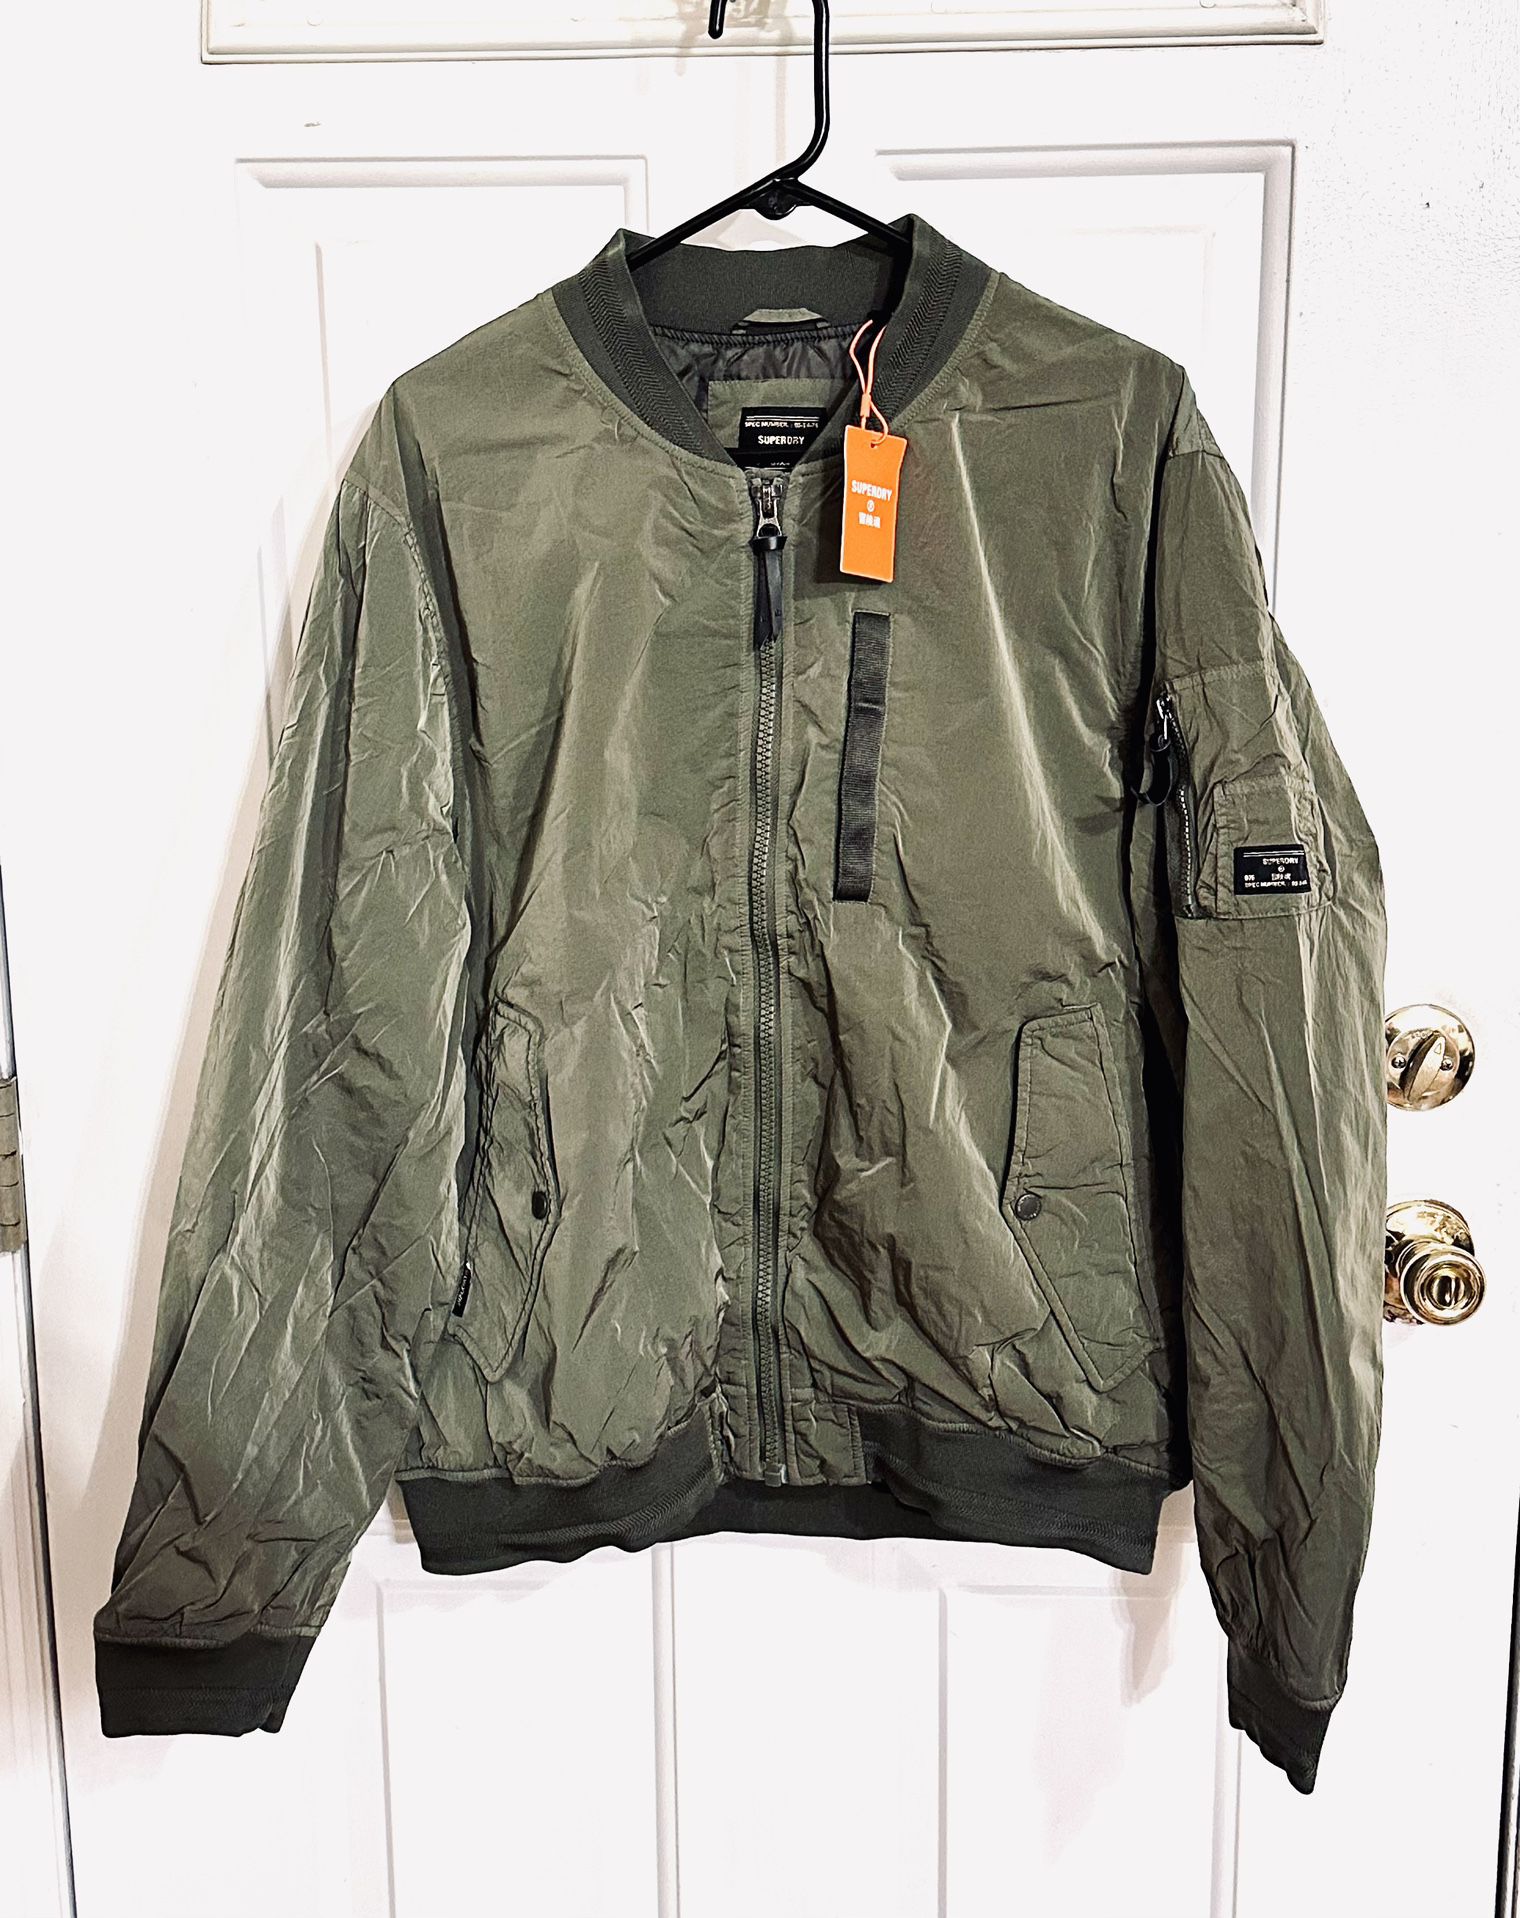 Super Dry Classic Green Bomber Jacket New With Tags